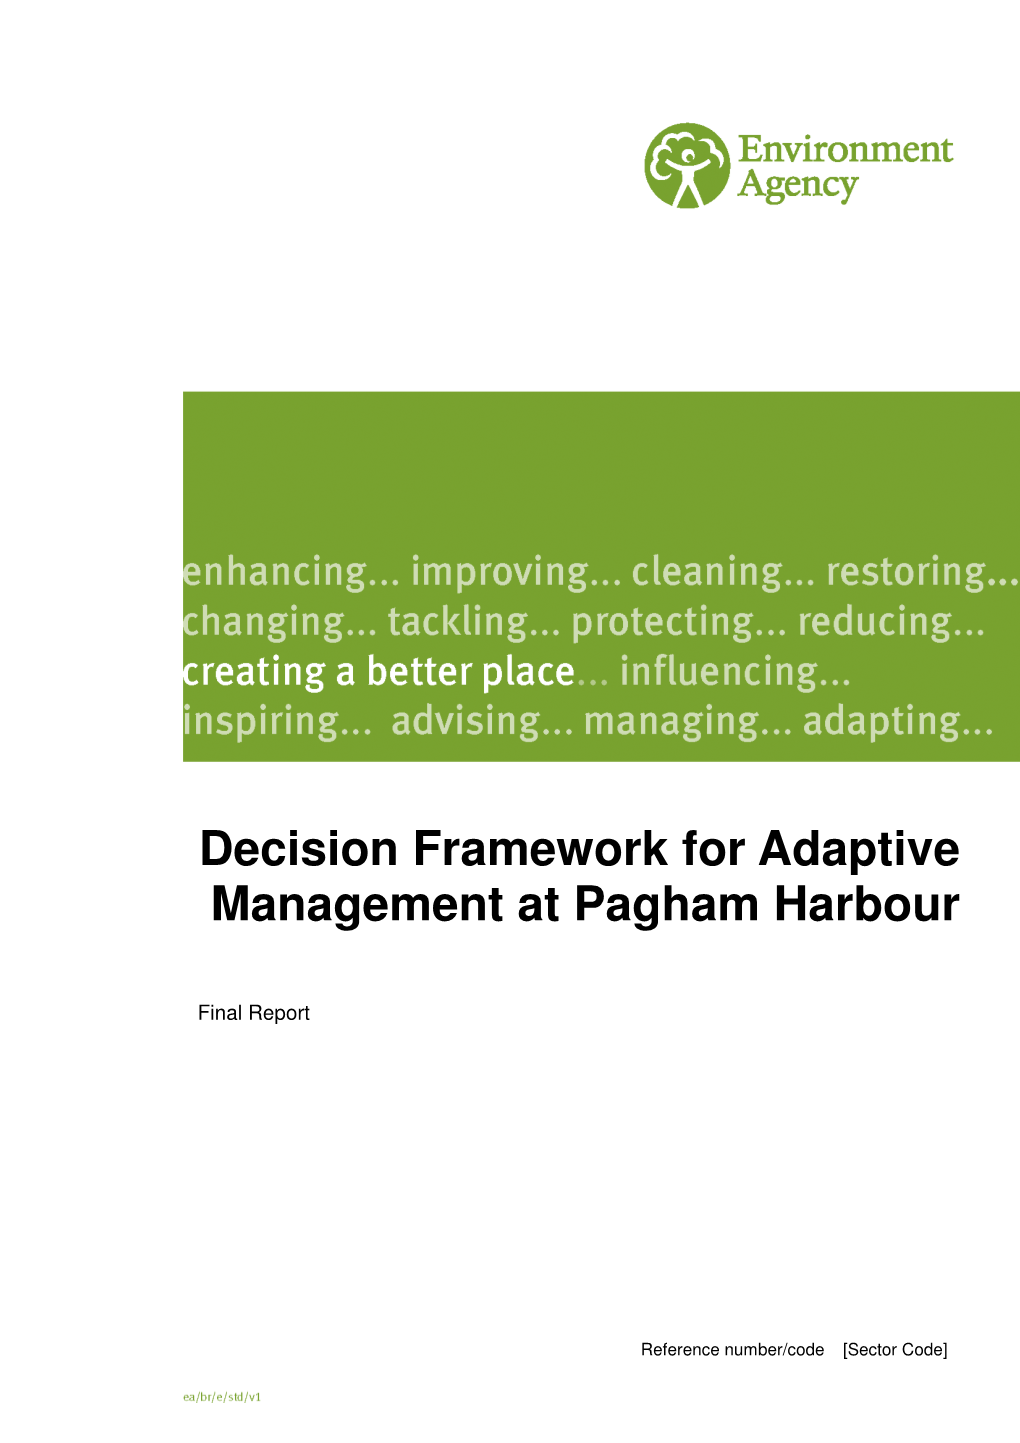 Decision Framework for Adaptive Management at Pagham Harbour